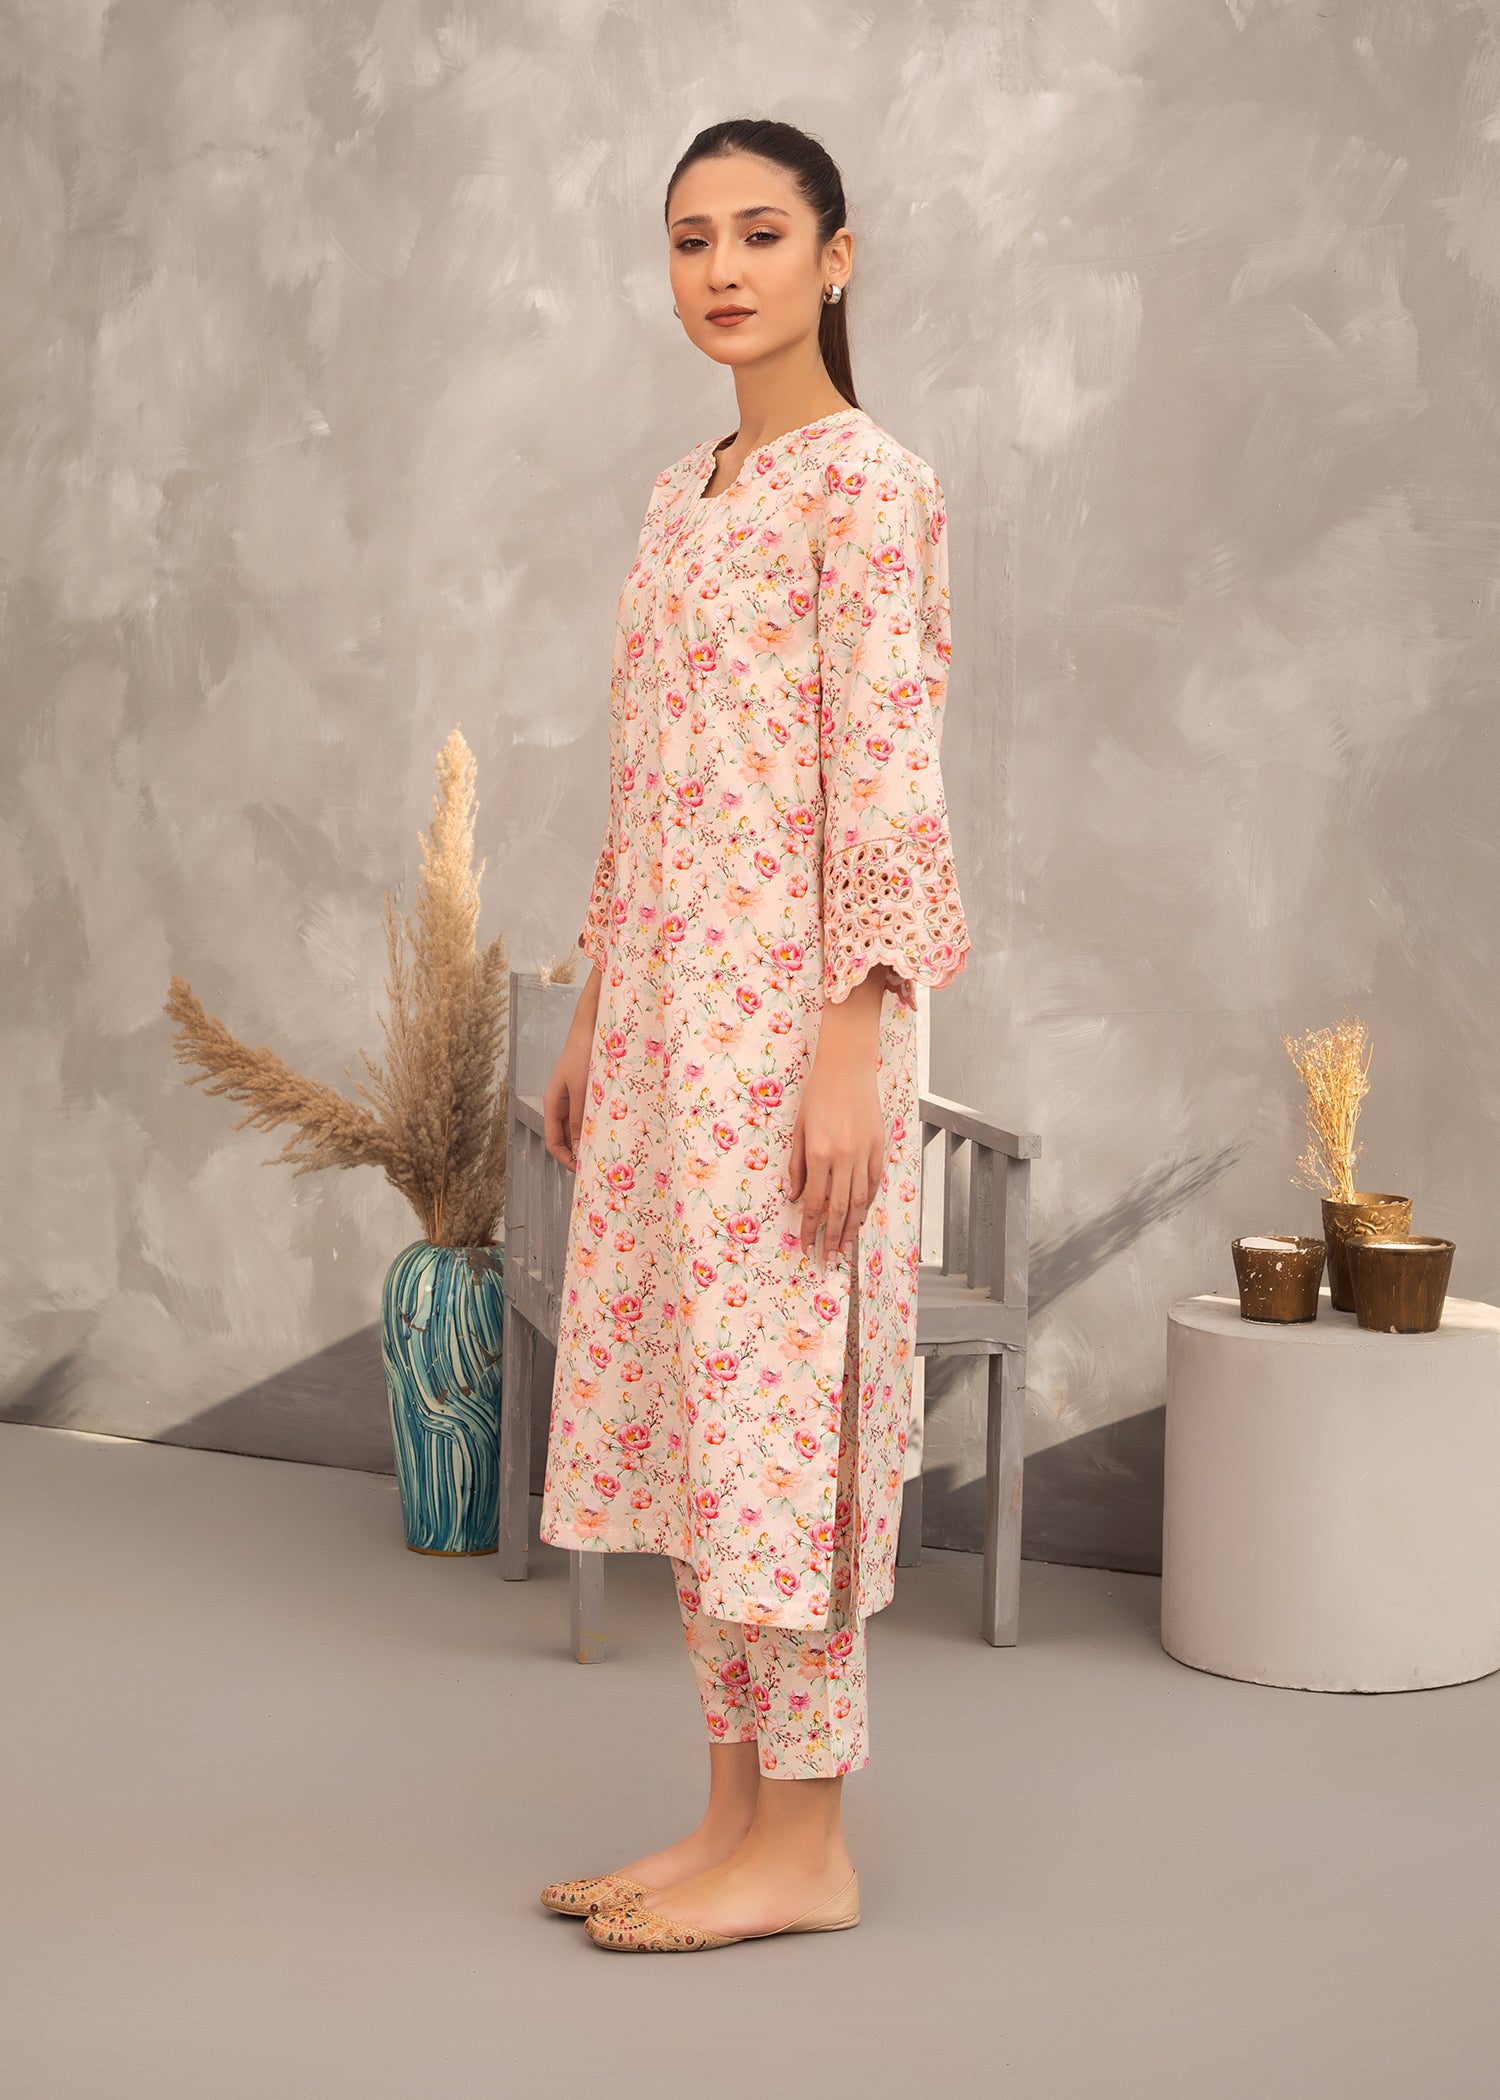 Off White & Pink Printed Lawn Suit